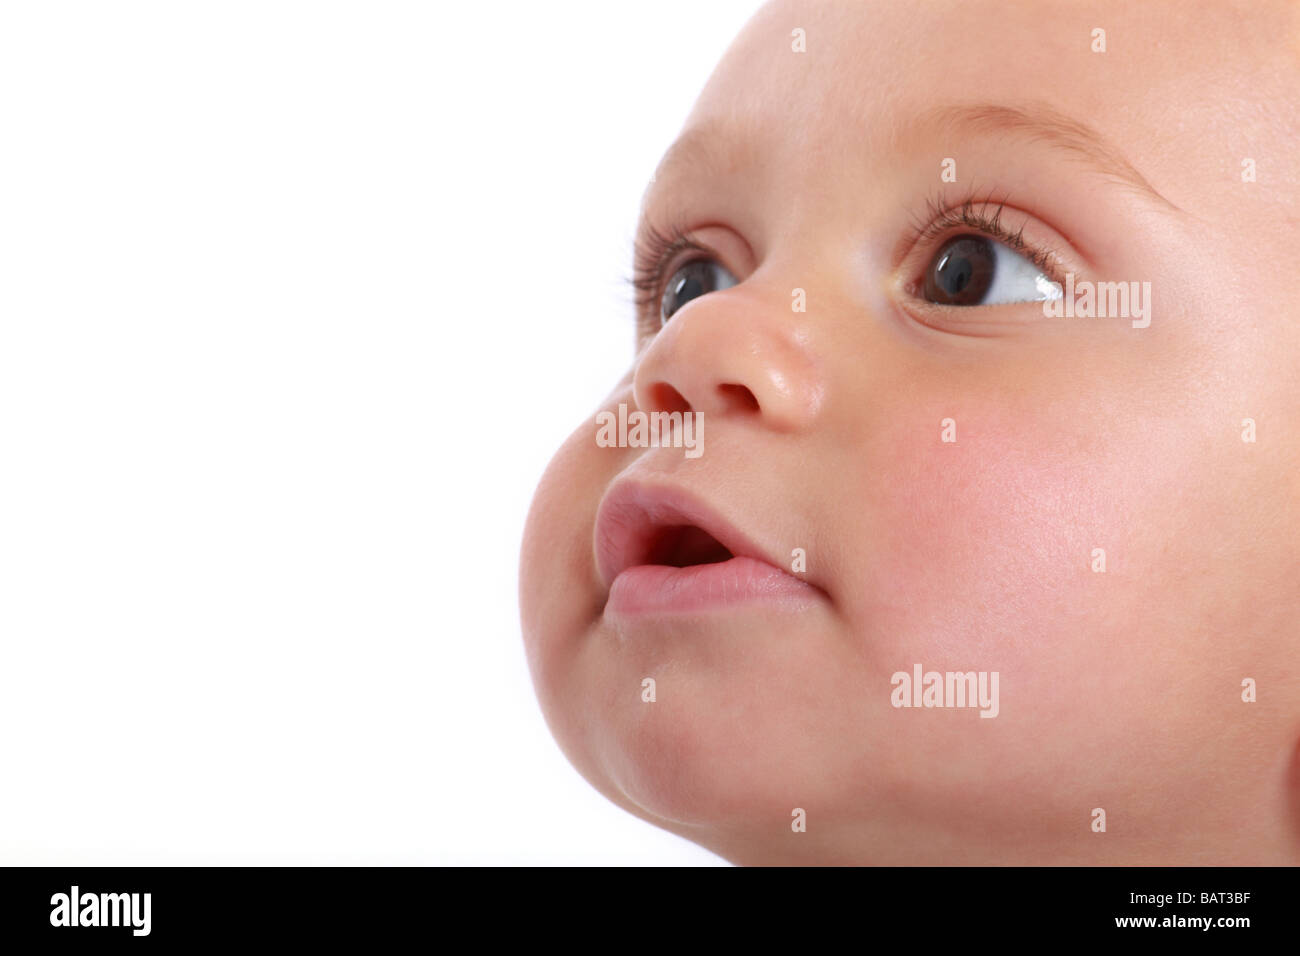 baby's face close up Stock Photo